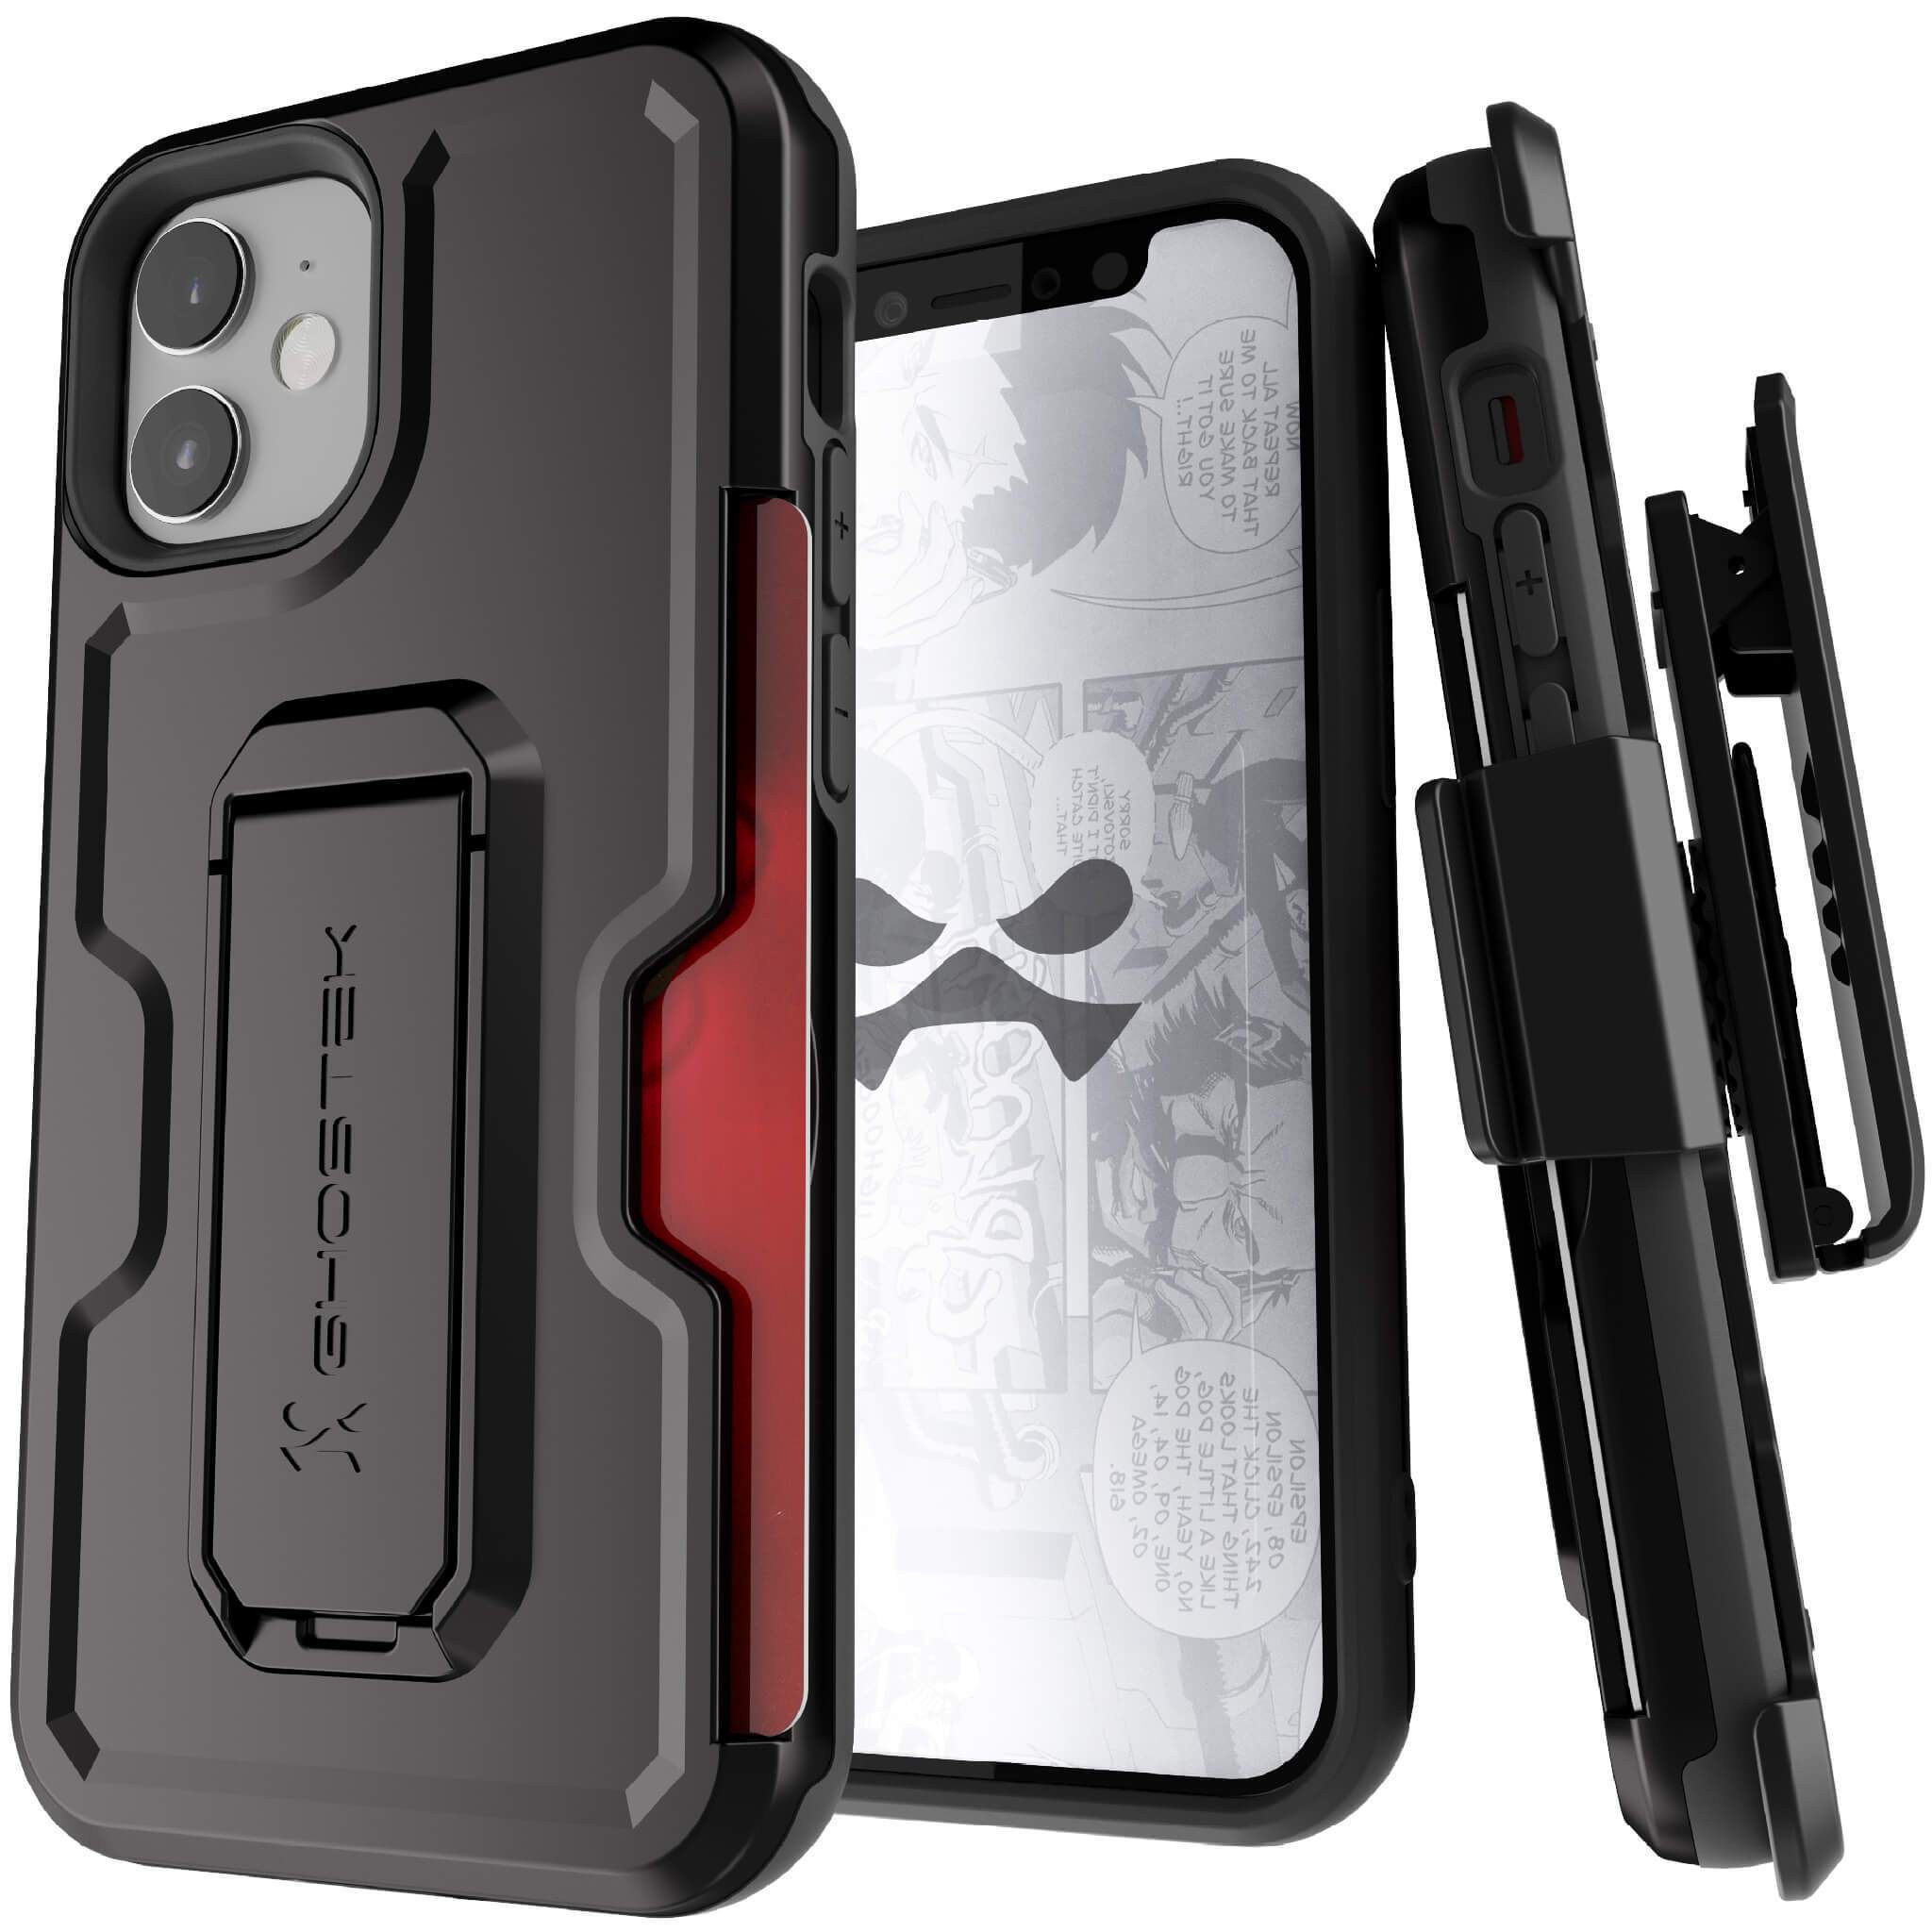 iPhone 12  - IRON ARMOR Belt Clip Holster Case with Stand and Card Holder [Matte Black]